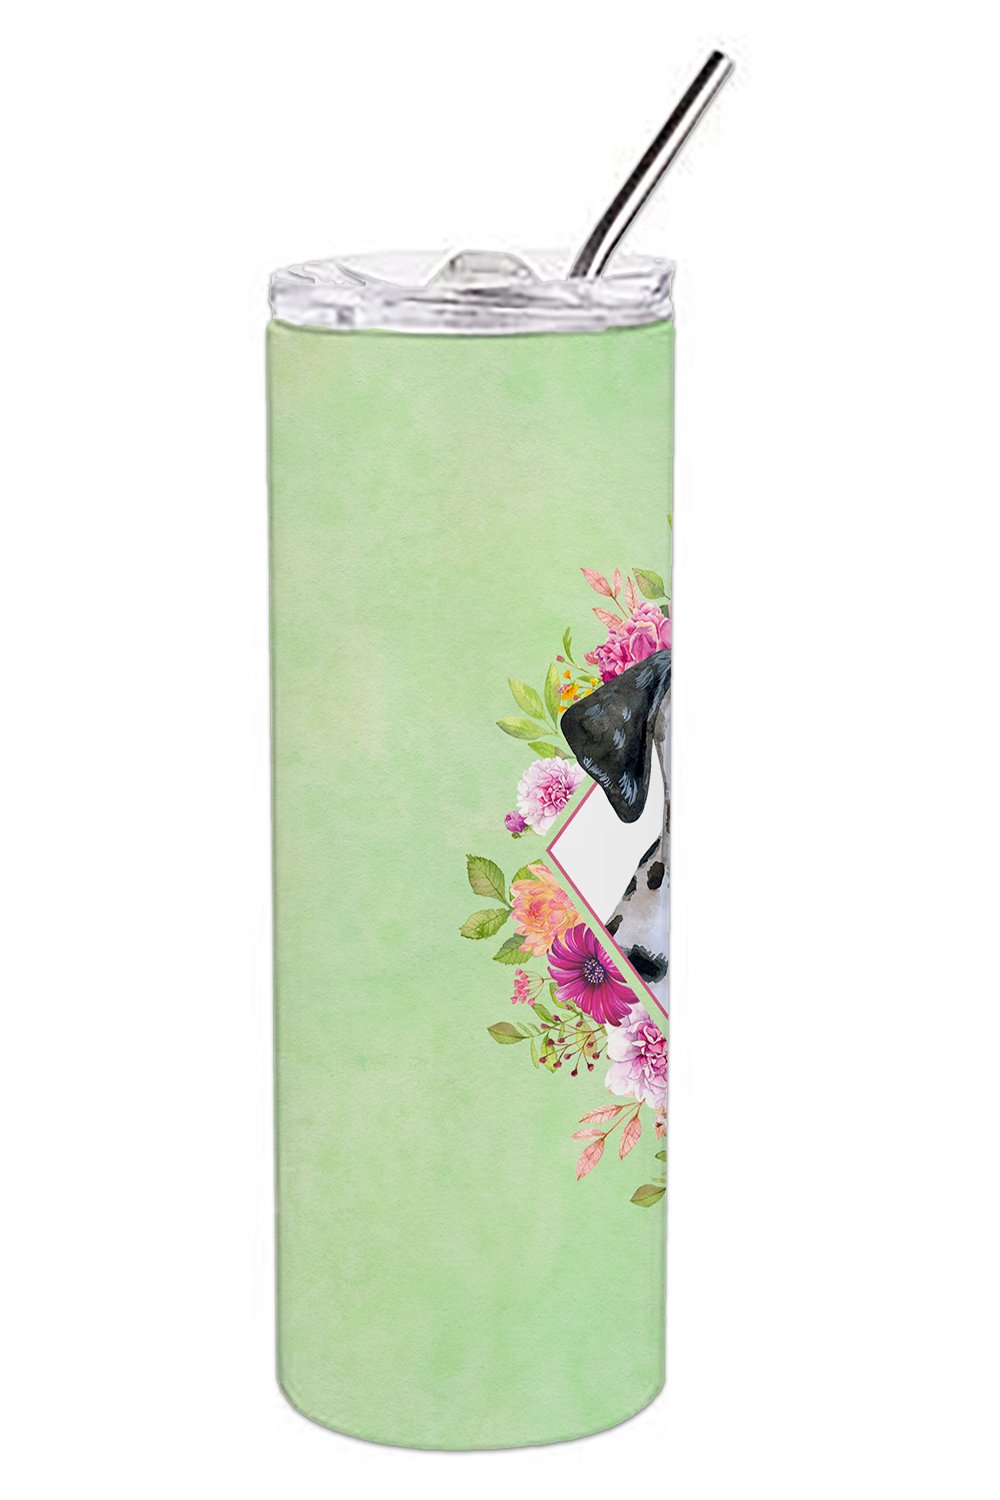 Dalmatian Puppy Green Flowers Double Walled Stainless Steel 20 oz Skinny Tumbler CK4296TBL20 by Caroline's Treasures